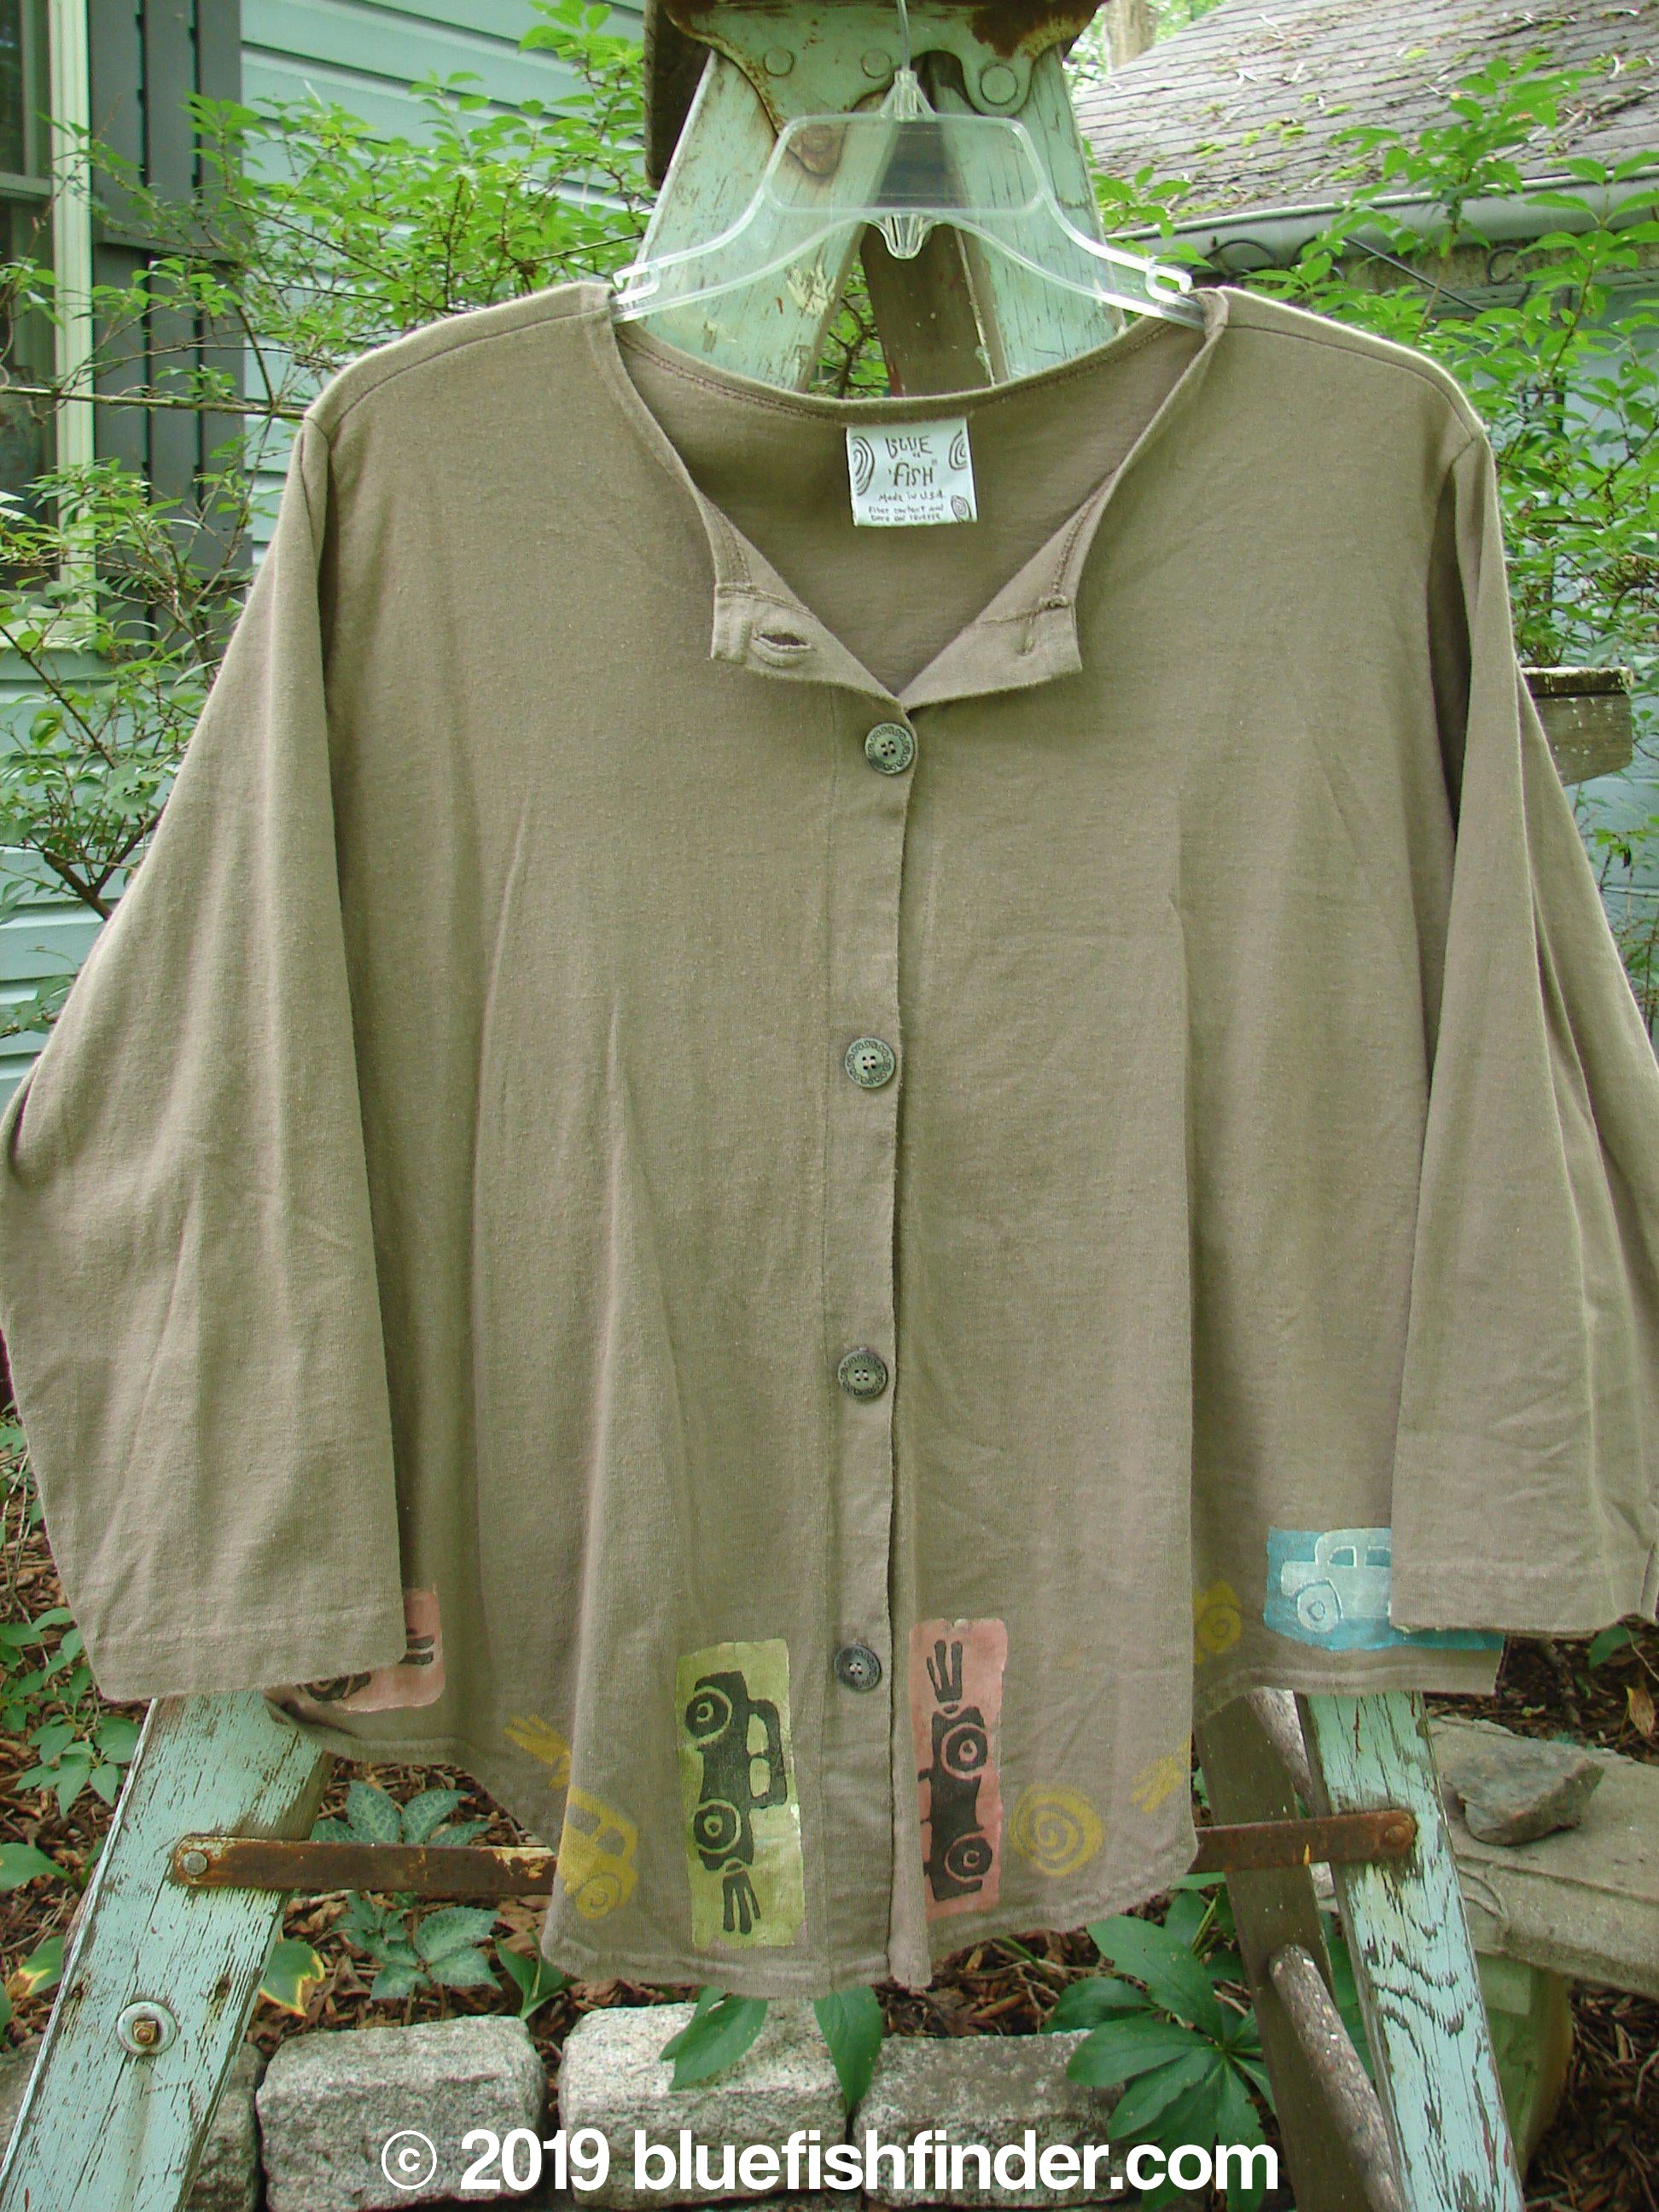 Image alt text: "1993 Tie Back Jacket Car Bay Leaf OSFA: A brown shirt with a patch on it, featuring a top vintage button, drop shoulders, and varying front and back hemline. Made from mid-weight cotton, this vintage collectible is in perfect condition."